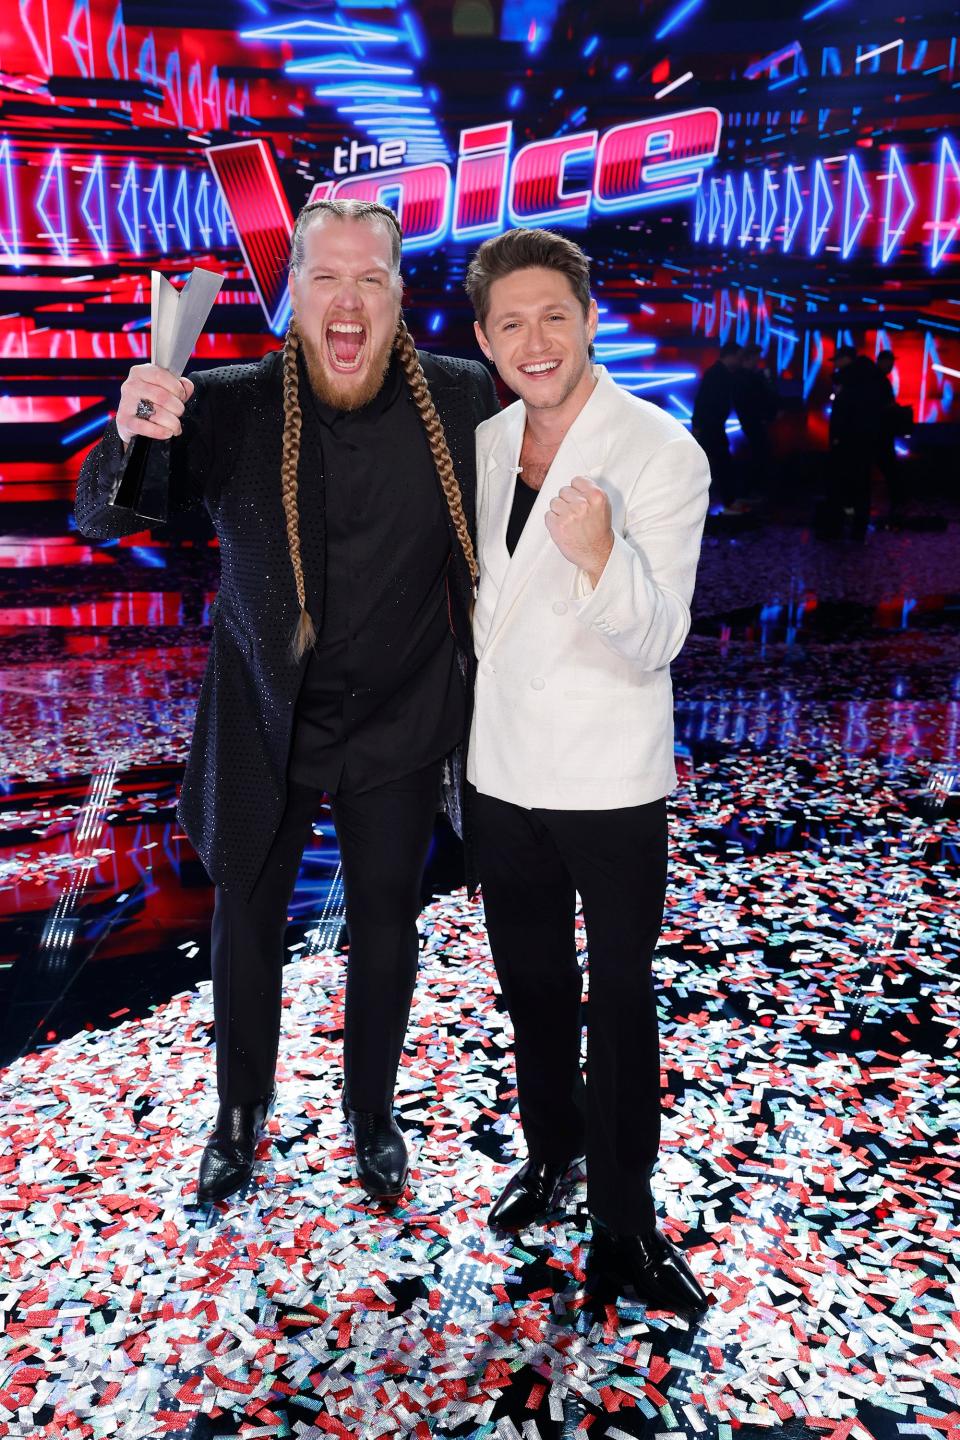 THE VOICE -- "Live Finale, Part 2” Episode 2422B -- Pictured: (l-r) Huntley, Niall Horan